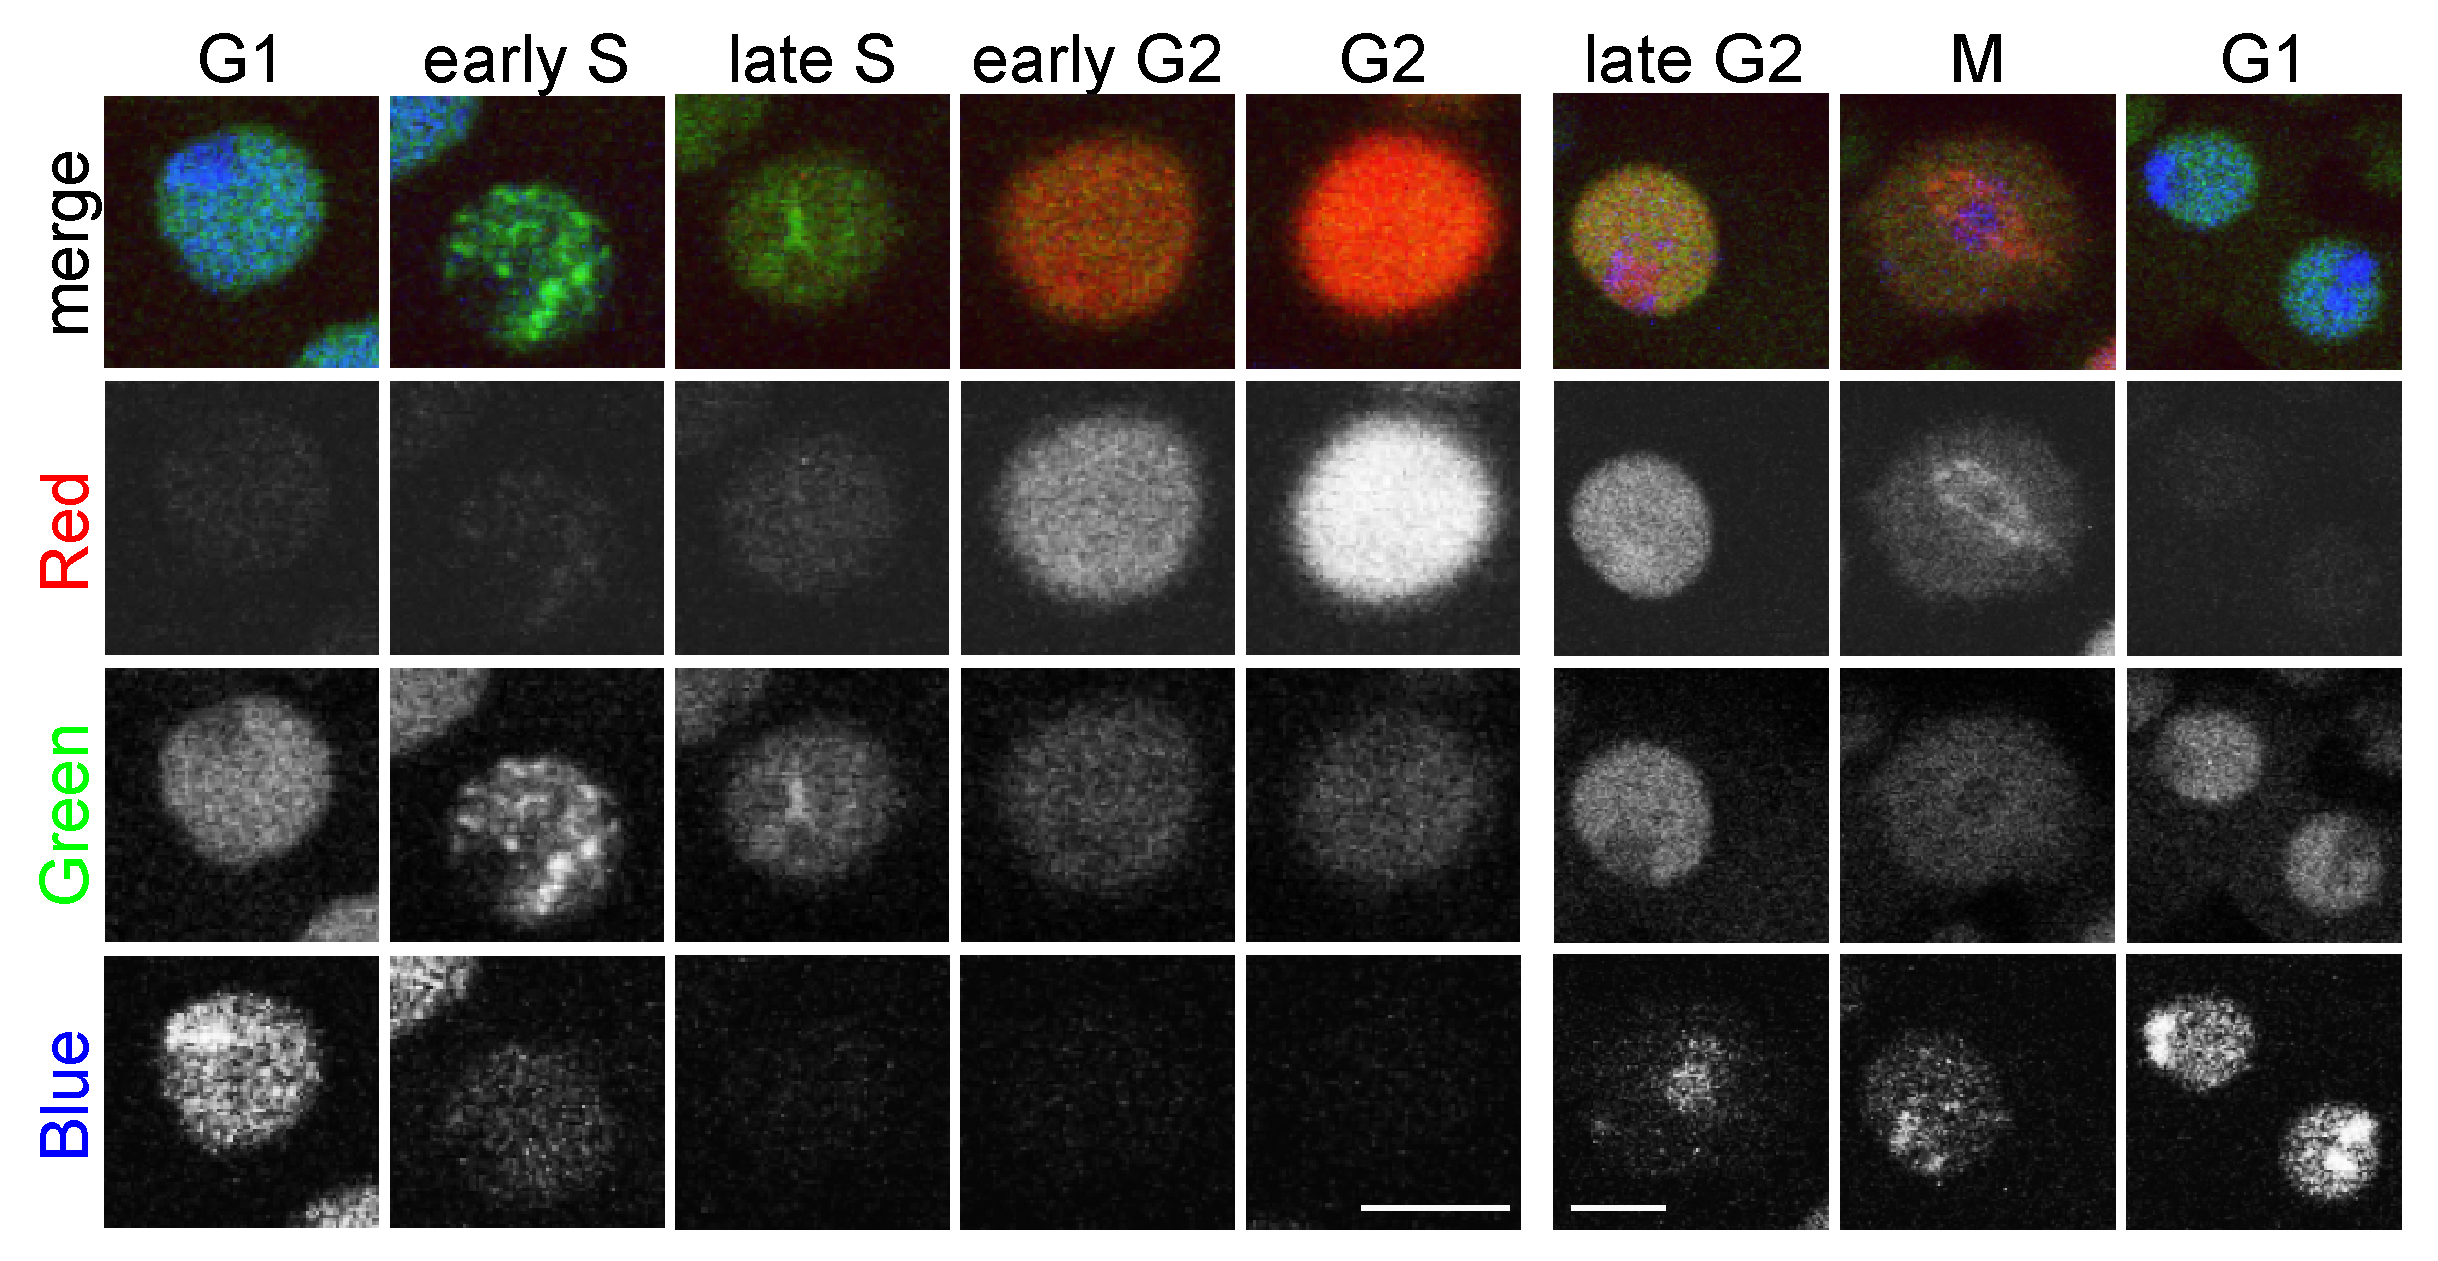 The panels in this figure show the expression of EBFP2 under control of Cdt1 regulatory sequences, the expression of tdTomato under the control of CycB regulatory sequences and the expression of EGFP under the control of PCNA regulatory sequences from the UAS-RGB.cct construct in the same cells during different cell cycle phases (G1, early S, late S, early G2, G2, late G2 and M)